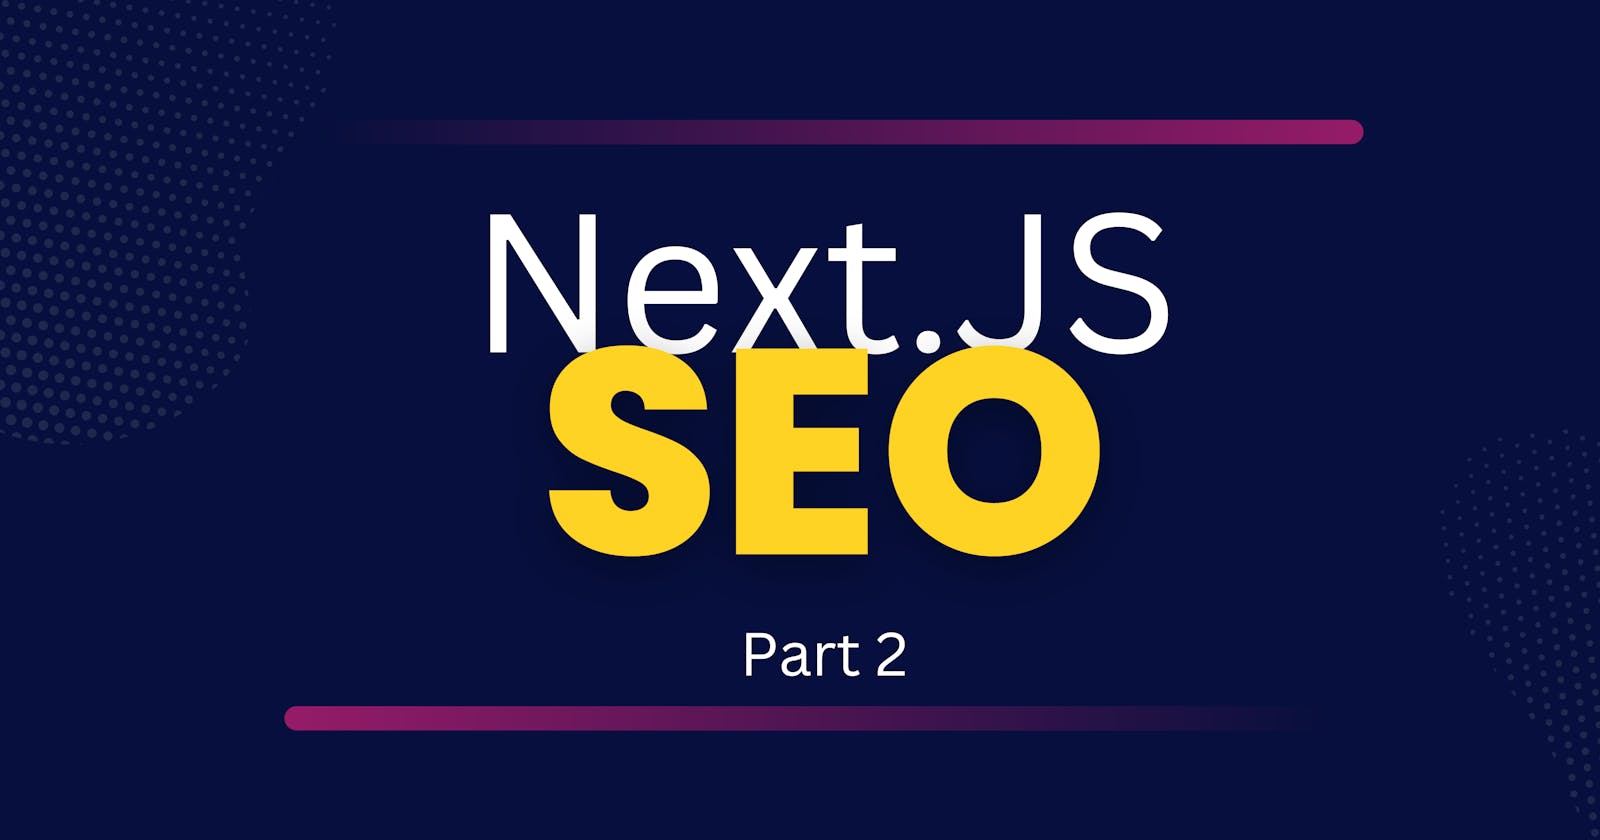 Next.js SEO Optimization for Developers and SEO Experts: Part 2 - Performance, Web Vitals, and Advanced Strategies